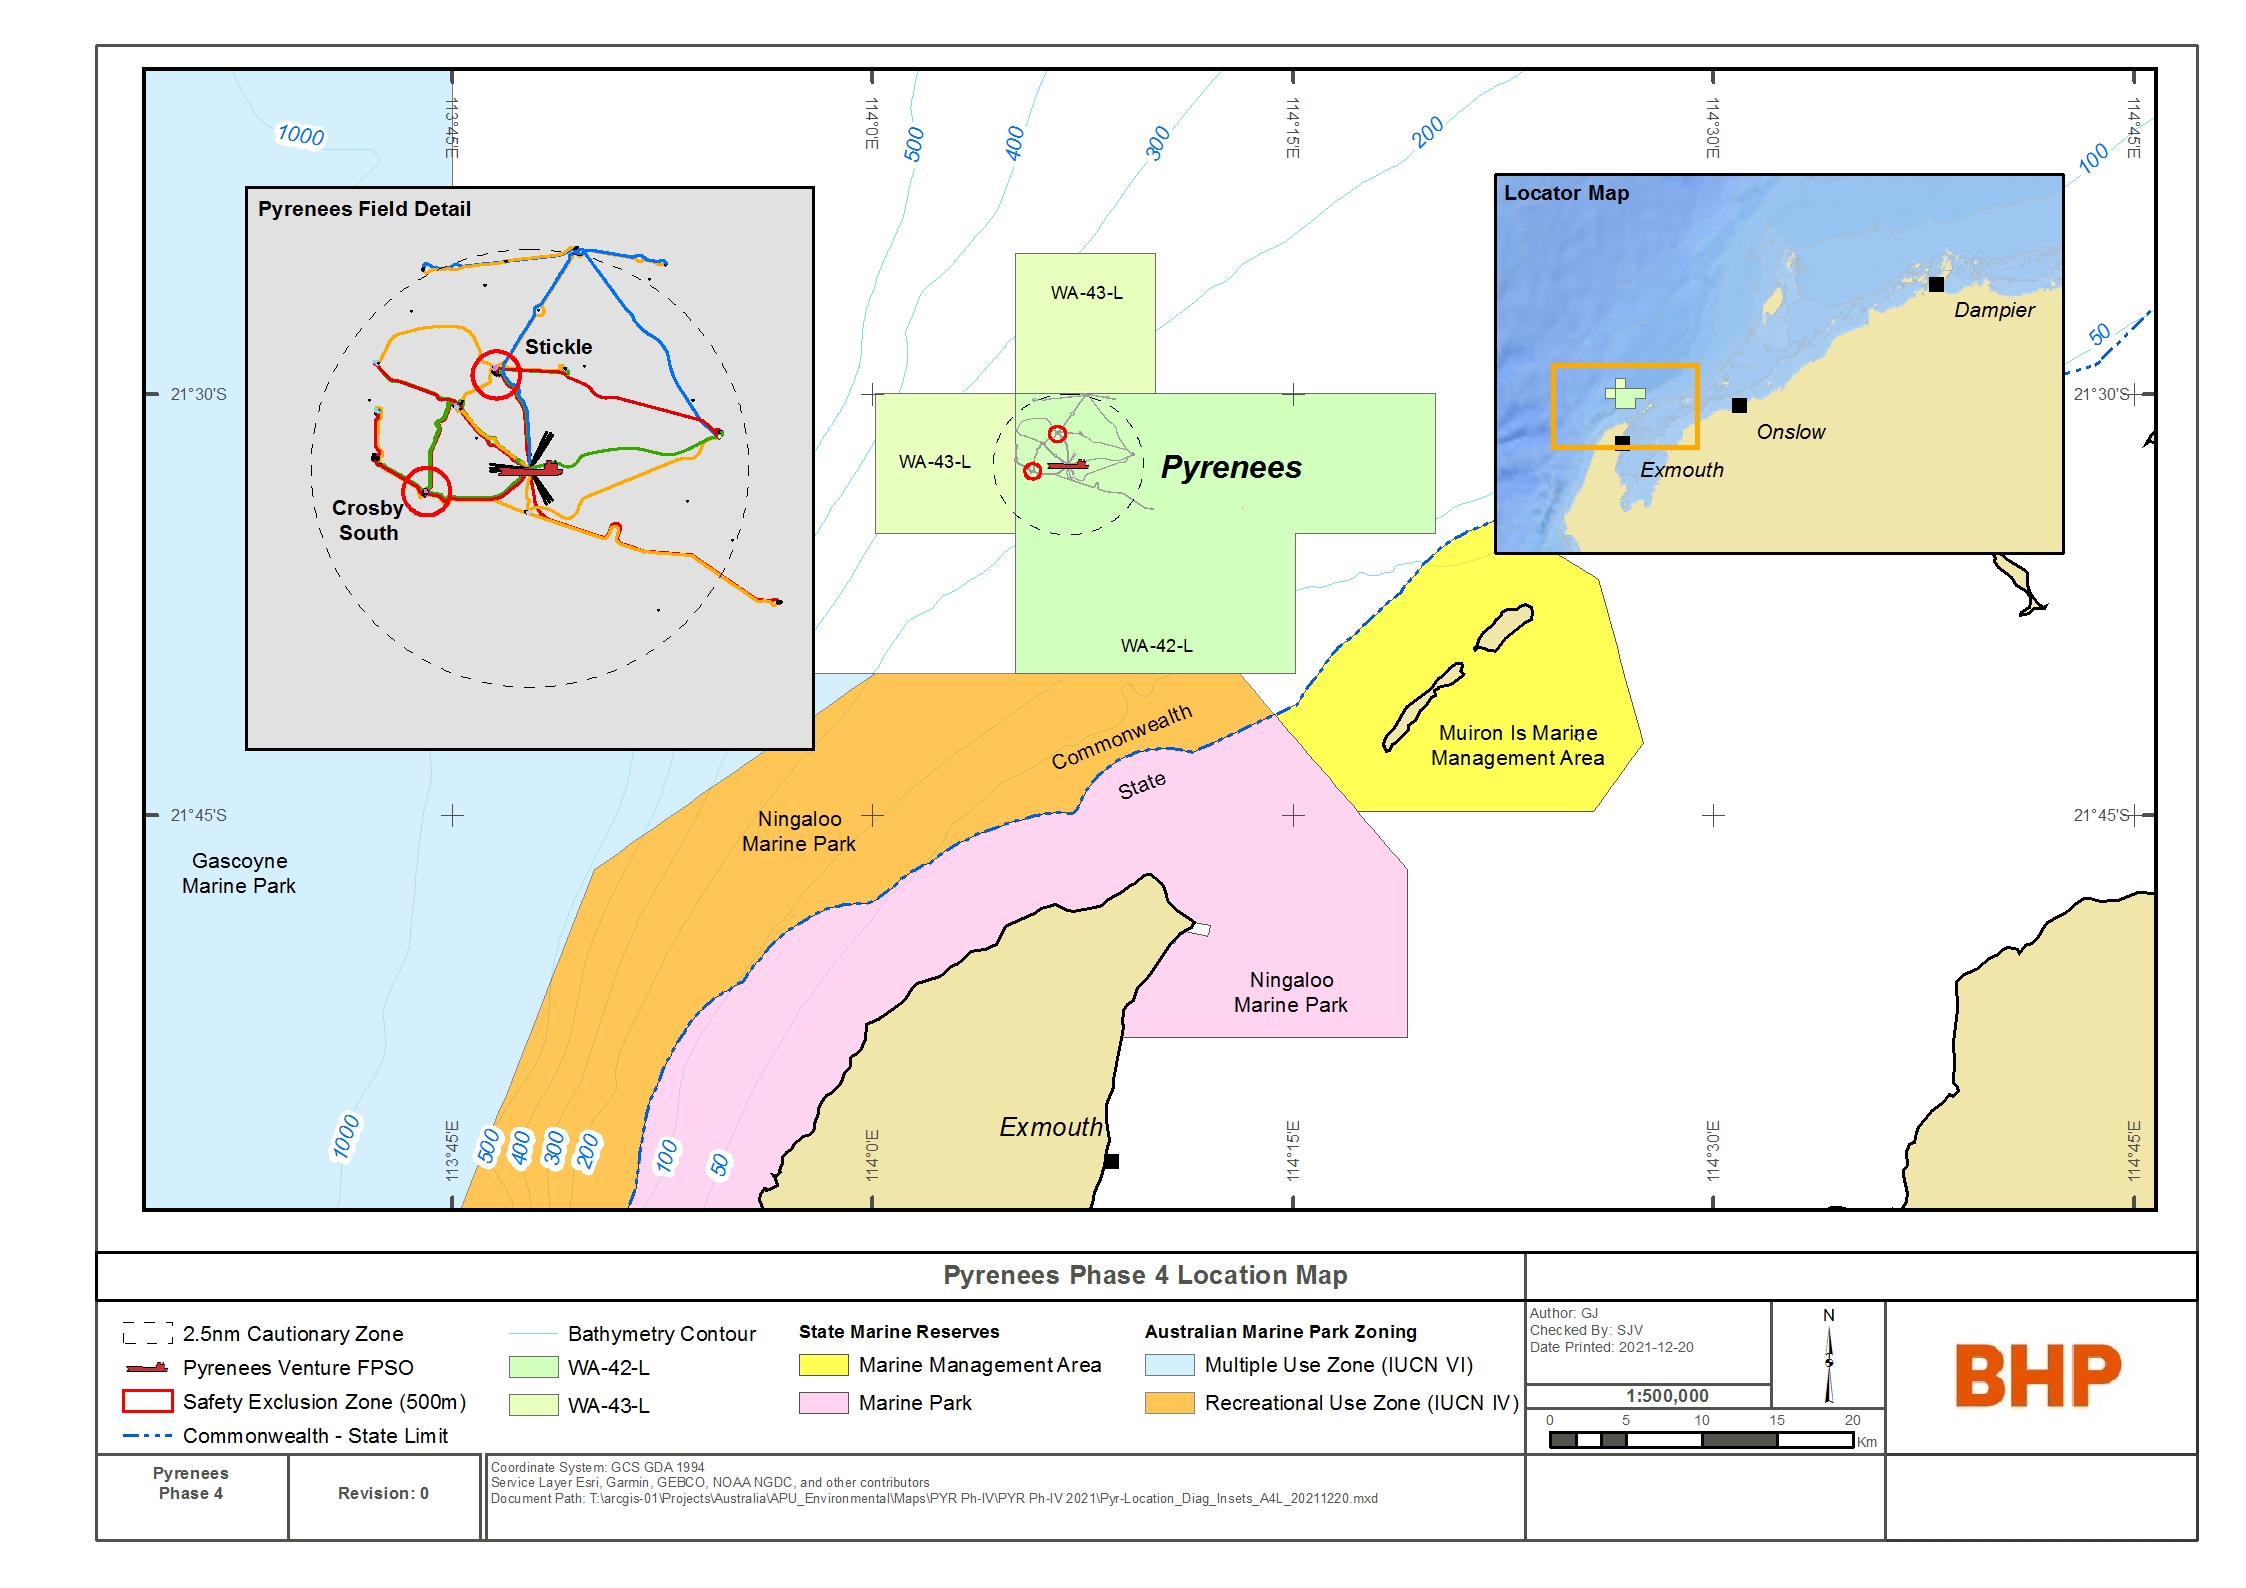 Location map - Activity: Pyrenees Phase 4 Infill Drilling Program (refer to description)